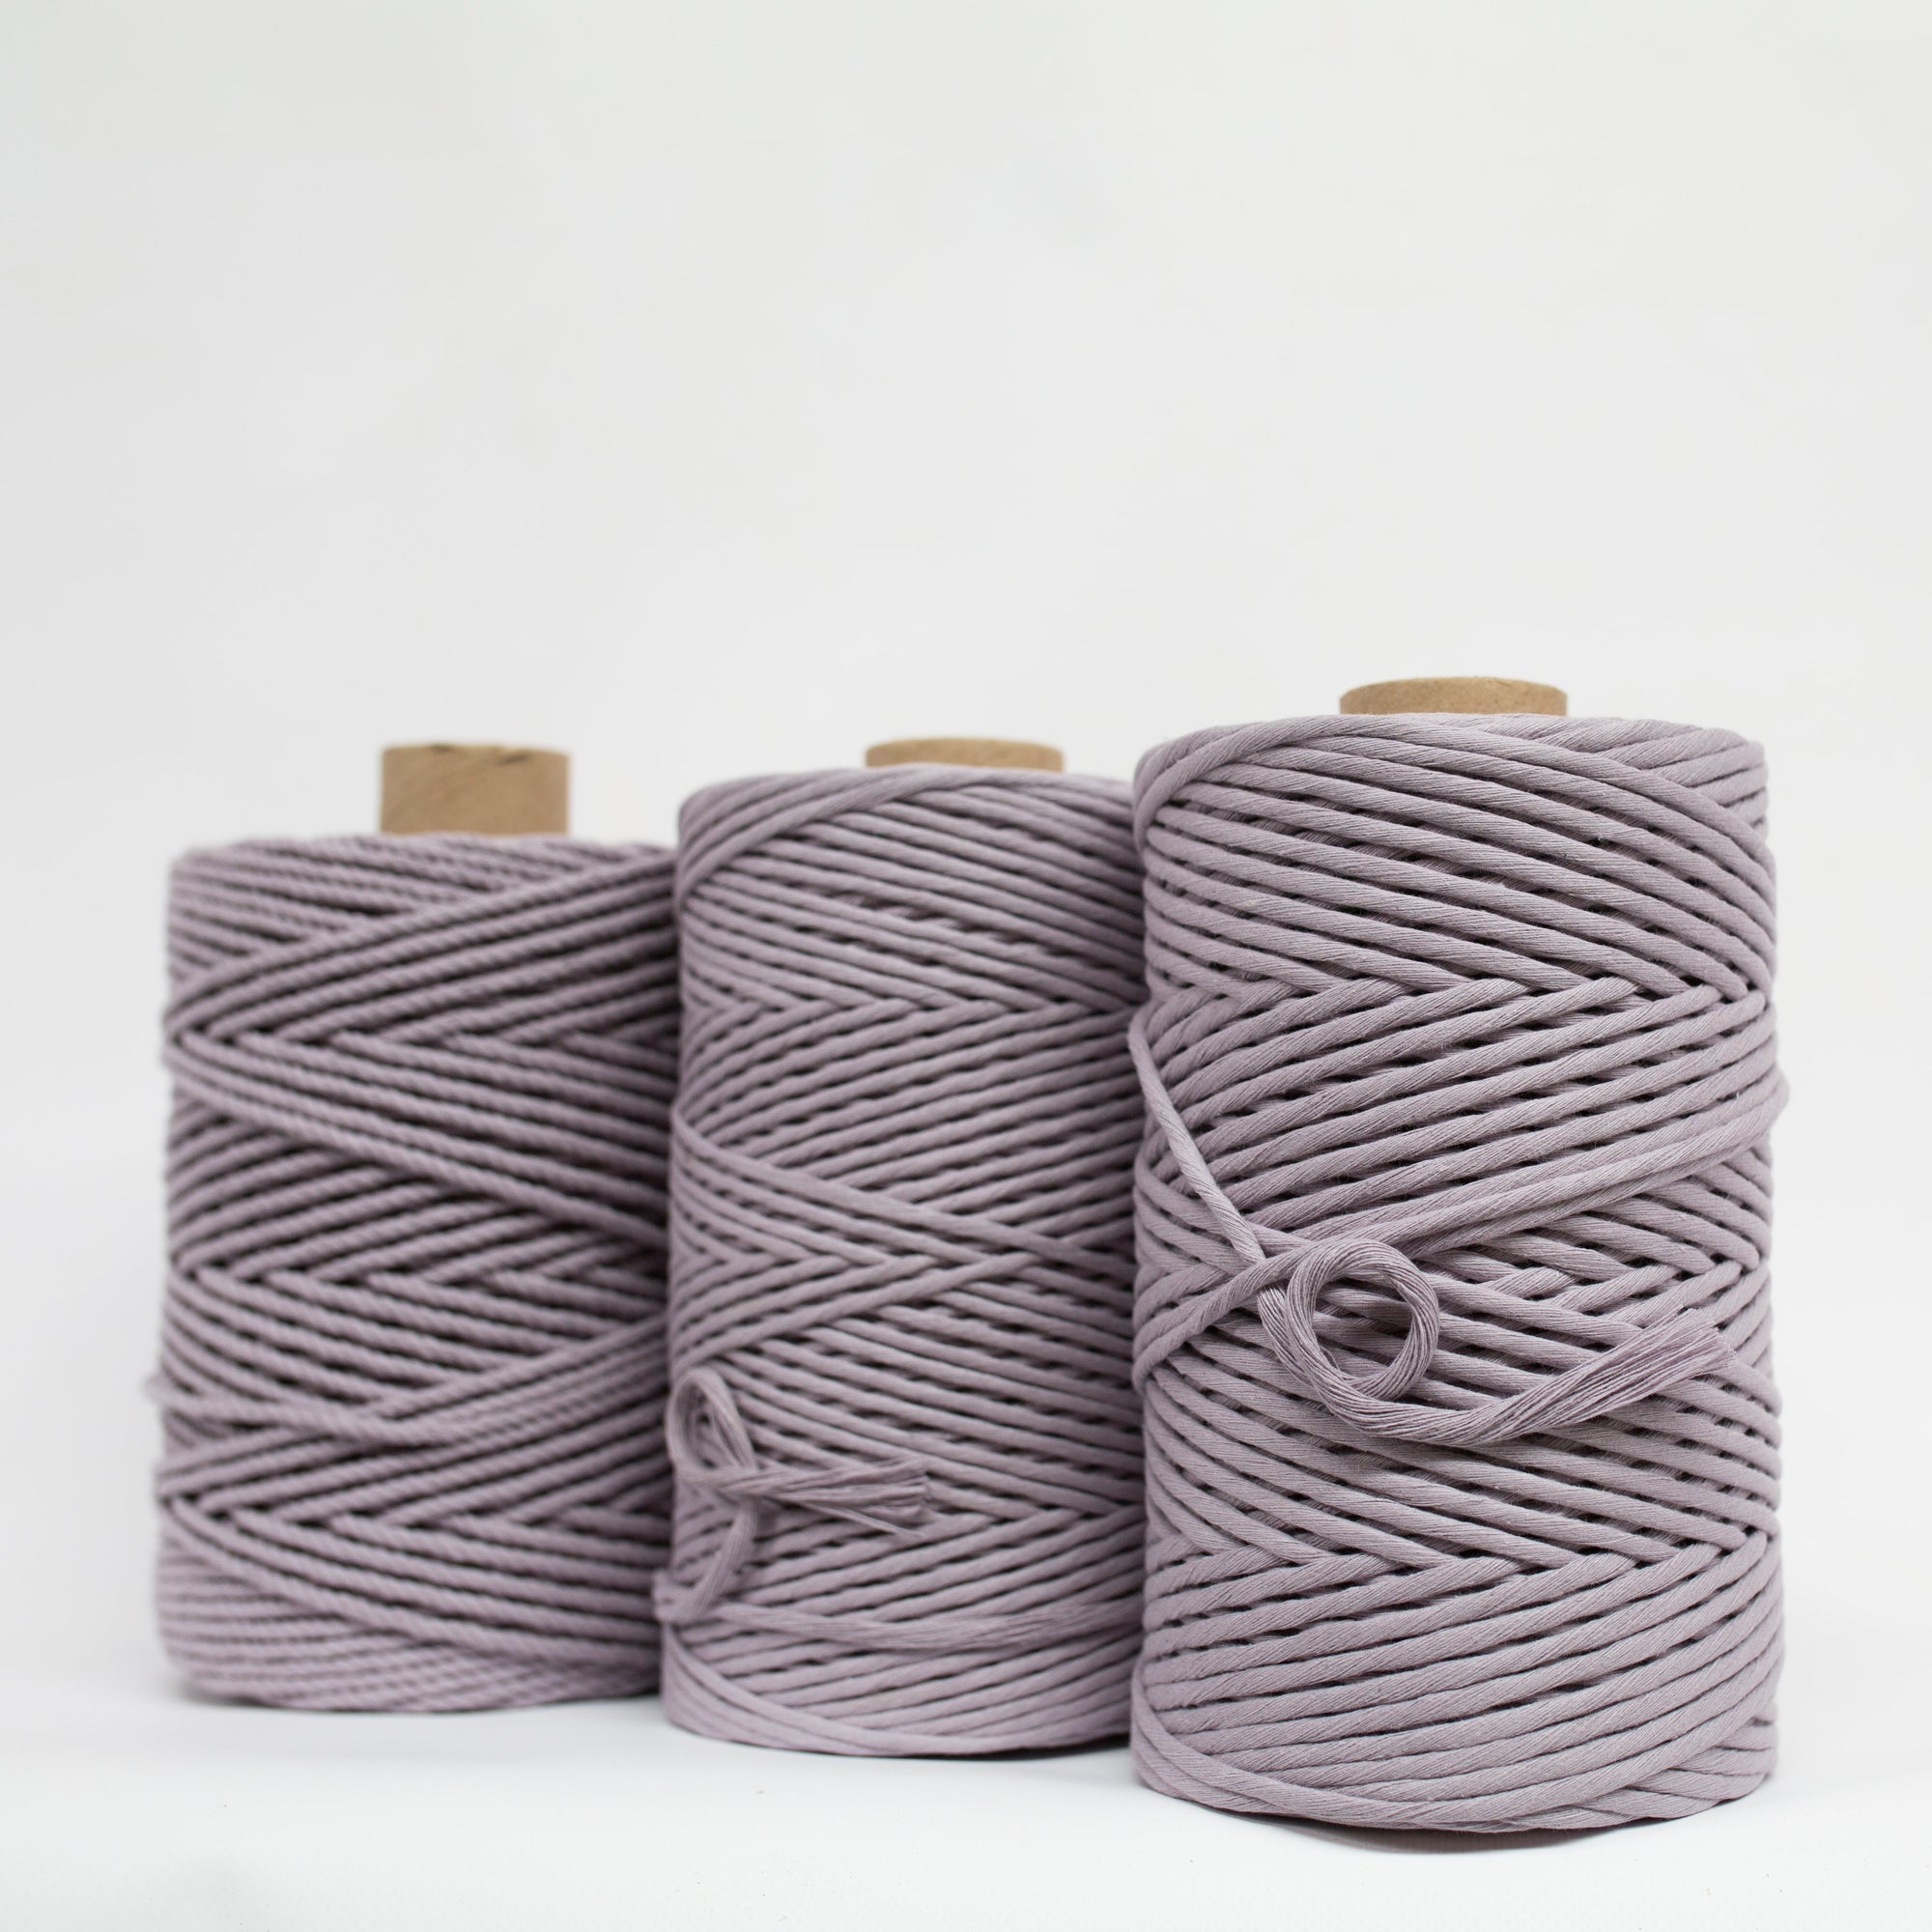 Mary Maker Studio Luxe Colour Cotton 4mm 1KG Recycled Luxe Macrame Rope // Hydrangea macrame cotton macrame rope macrame workshop macrame patterns macrame